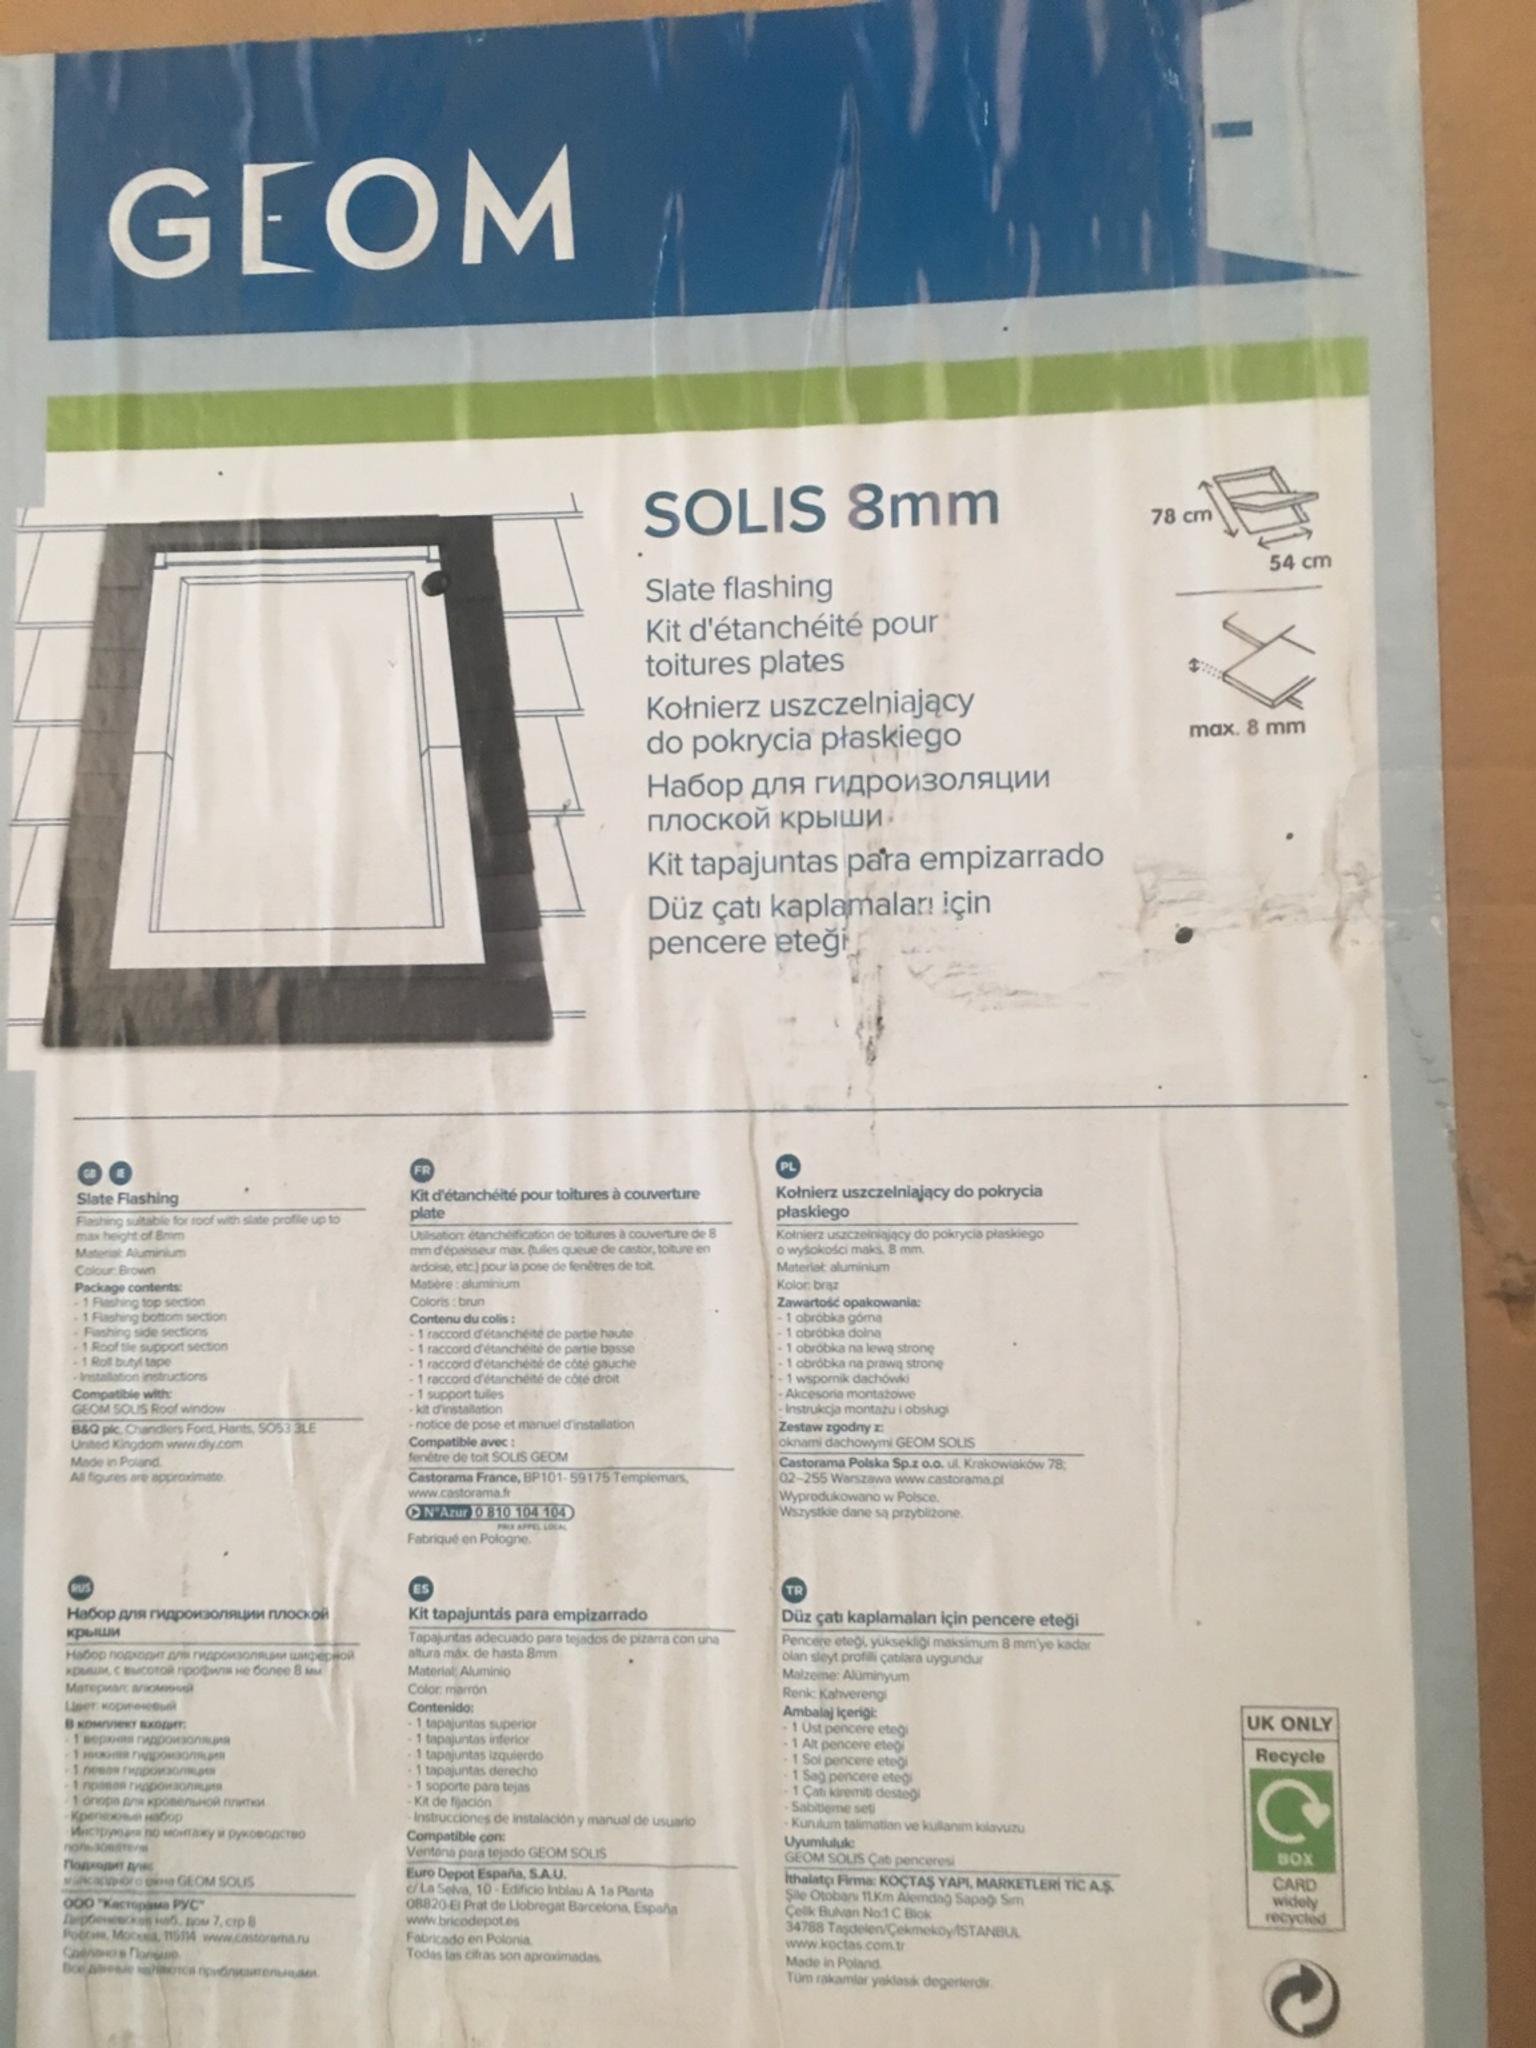 Velux Rood Window Flashing Kits In B64 Sandwell For 10 00 For Sale Shpock